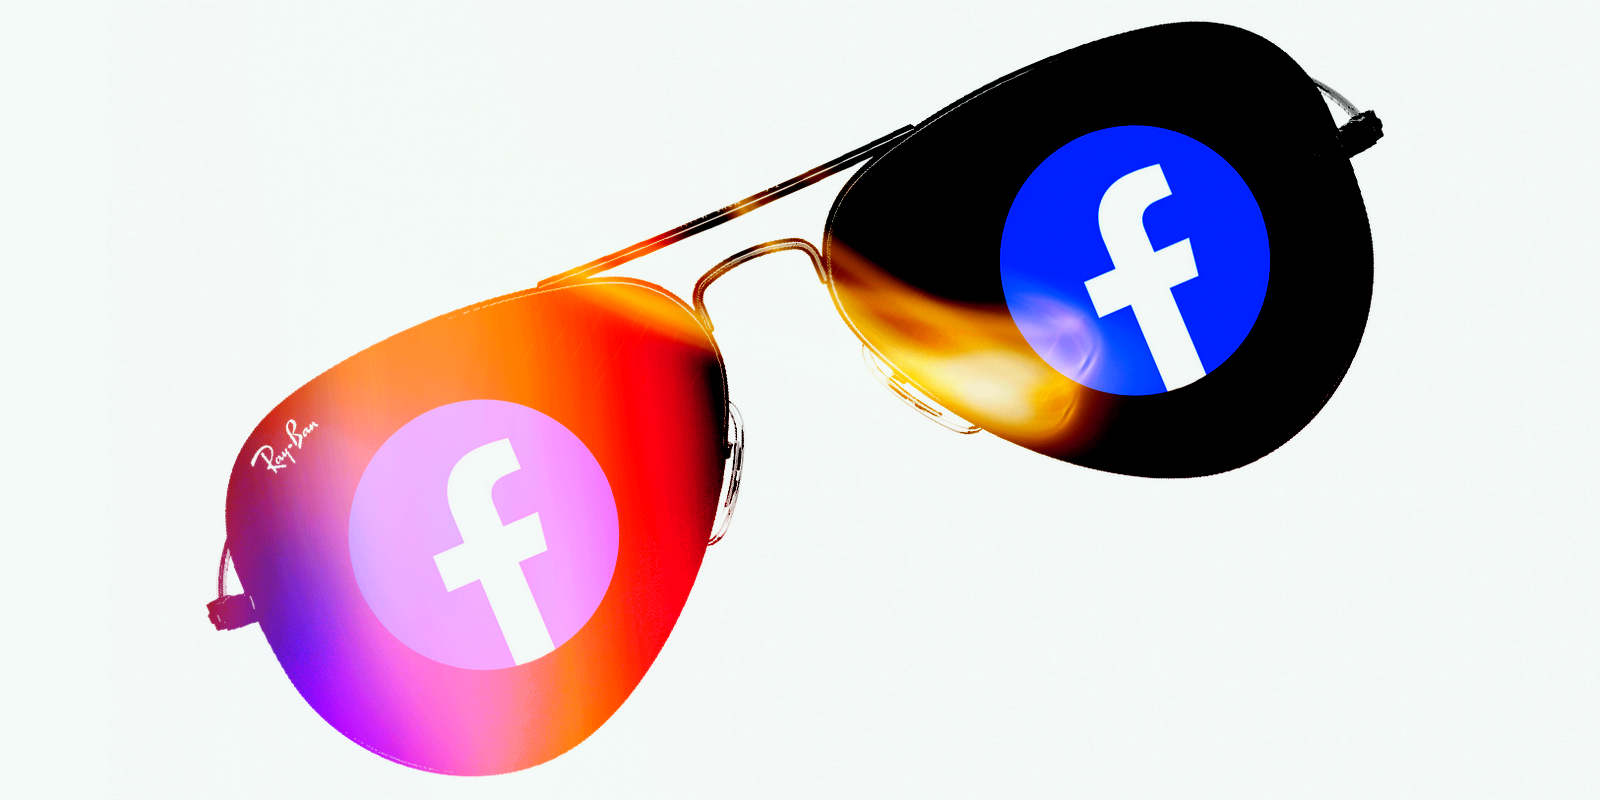 Facebook Making Smart Glasses With Help From Ray Ban